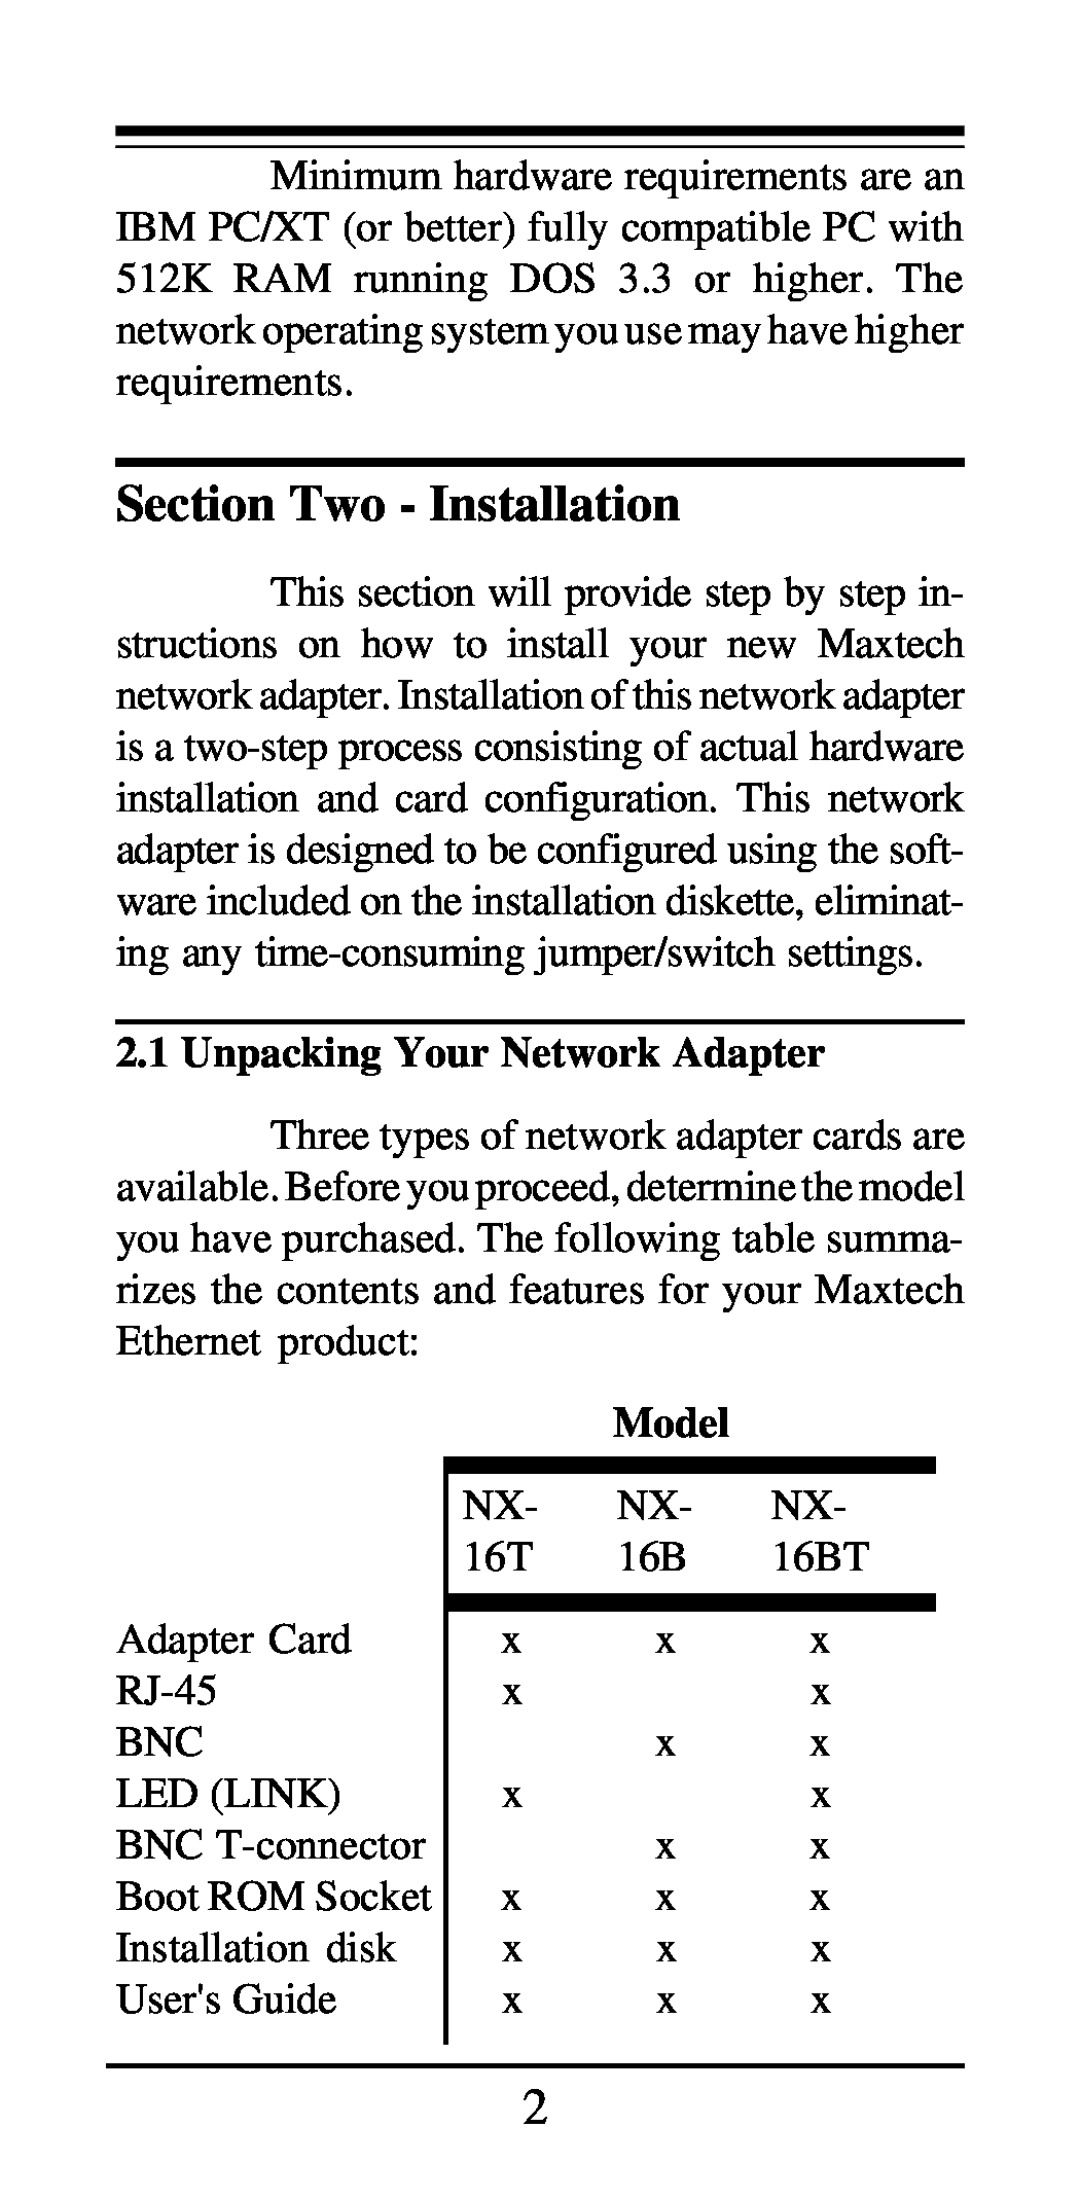 MaxTech NX-16 manual Section Two - Installation, Unpacking Your Network Adapter, Model 